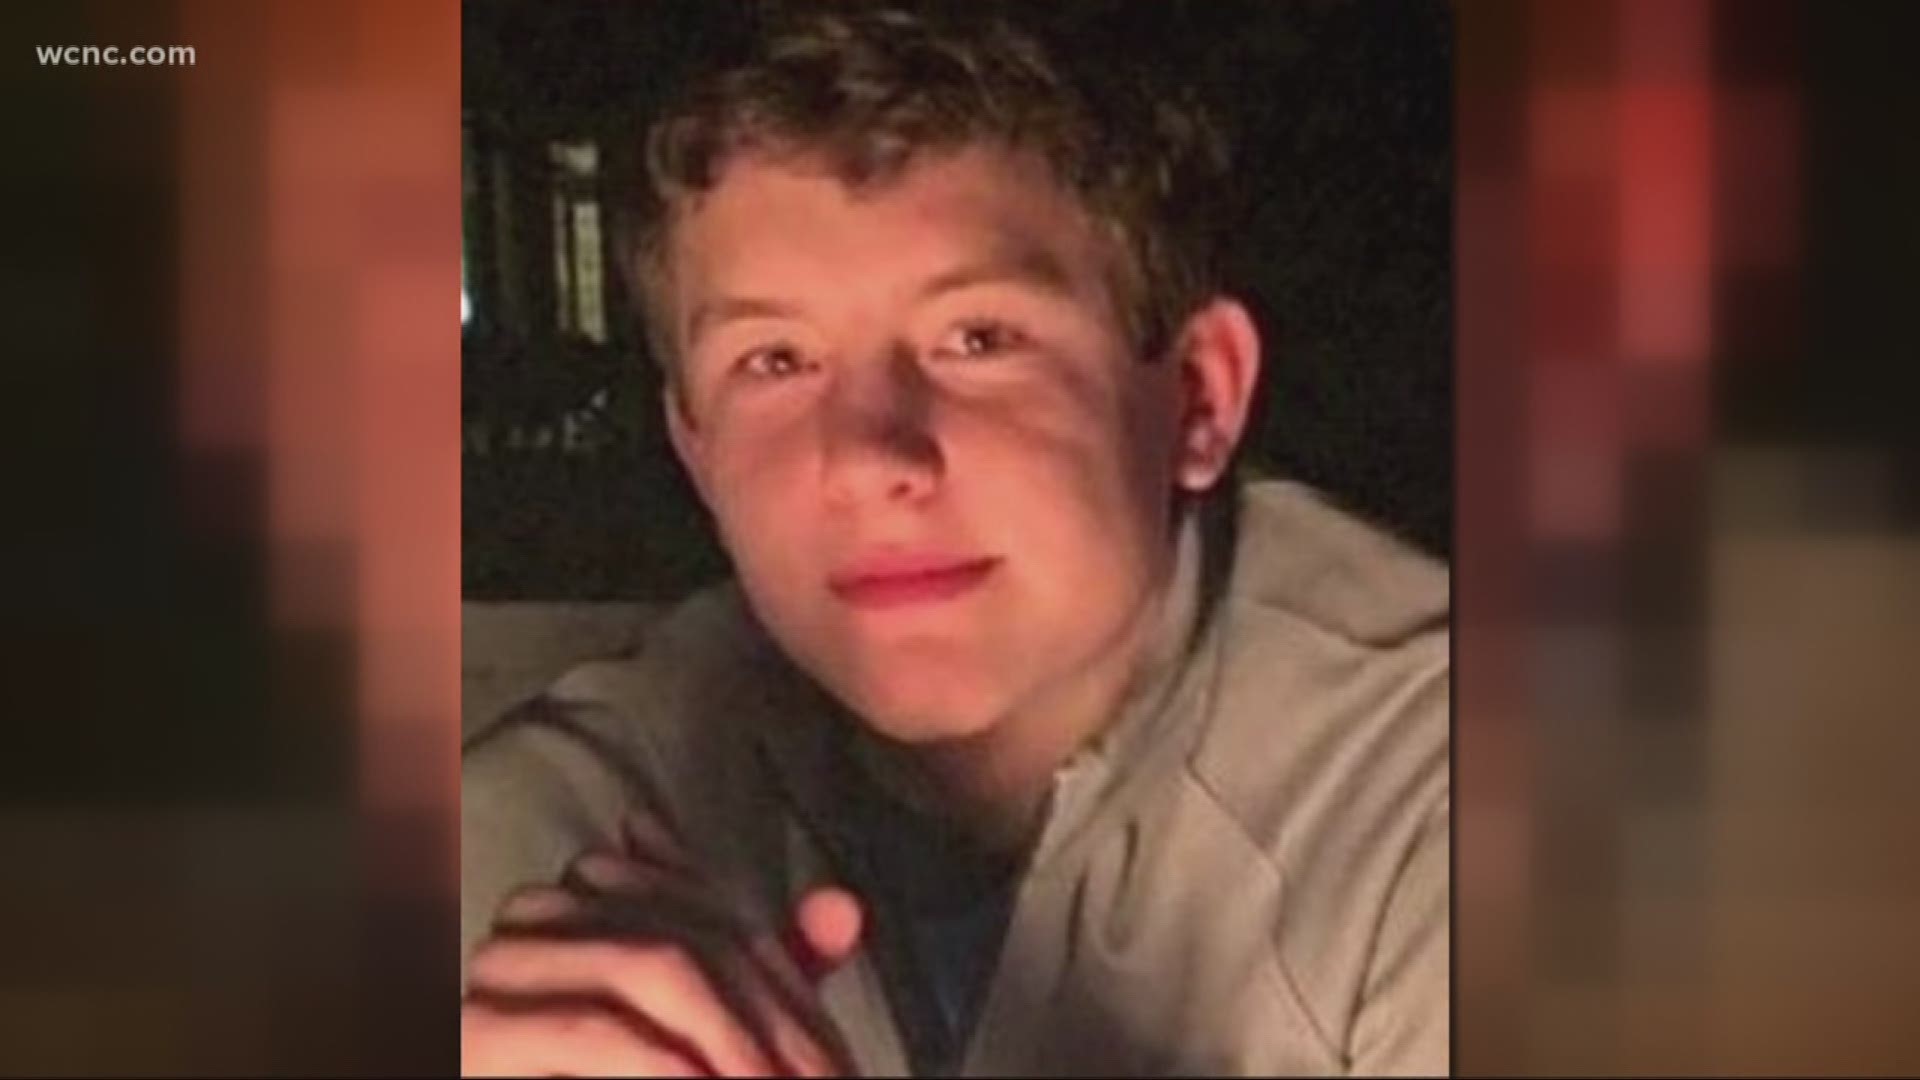 The community held a funeral service for 16-year-old, Benjamin Hager, who unexpectedly died in his sleep overnight Friday.